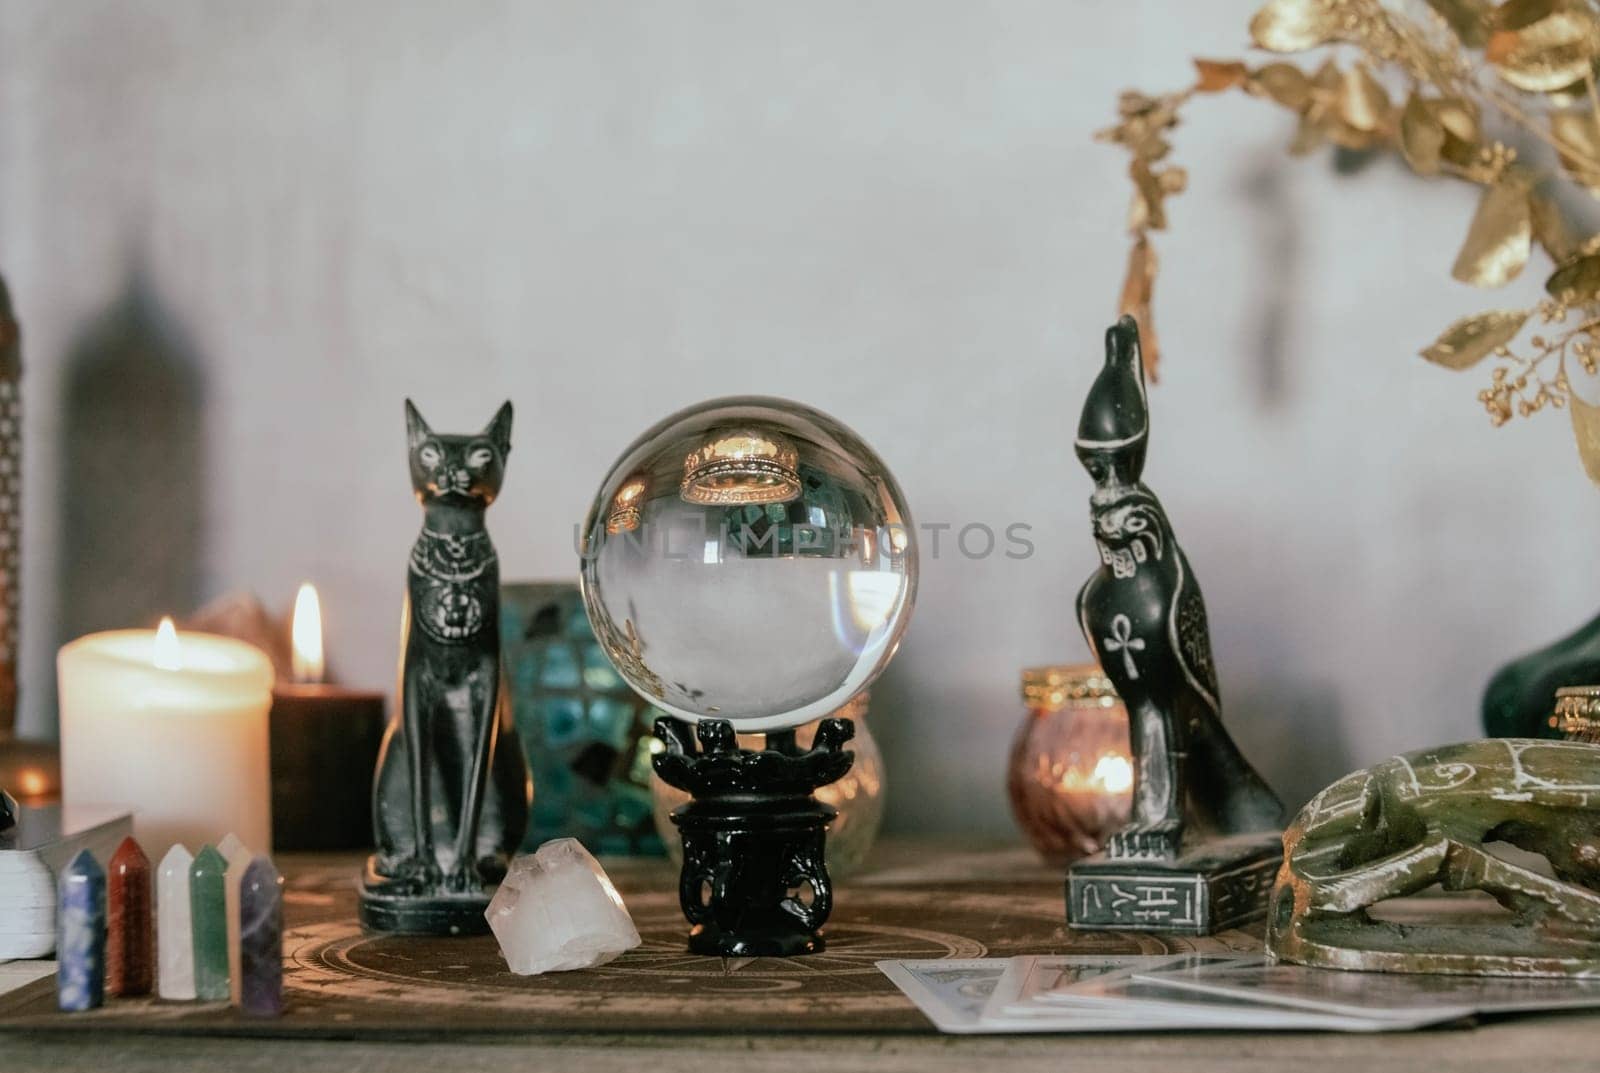 Esoteric Divination Setup with Tarot Cards and Crystal Ball